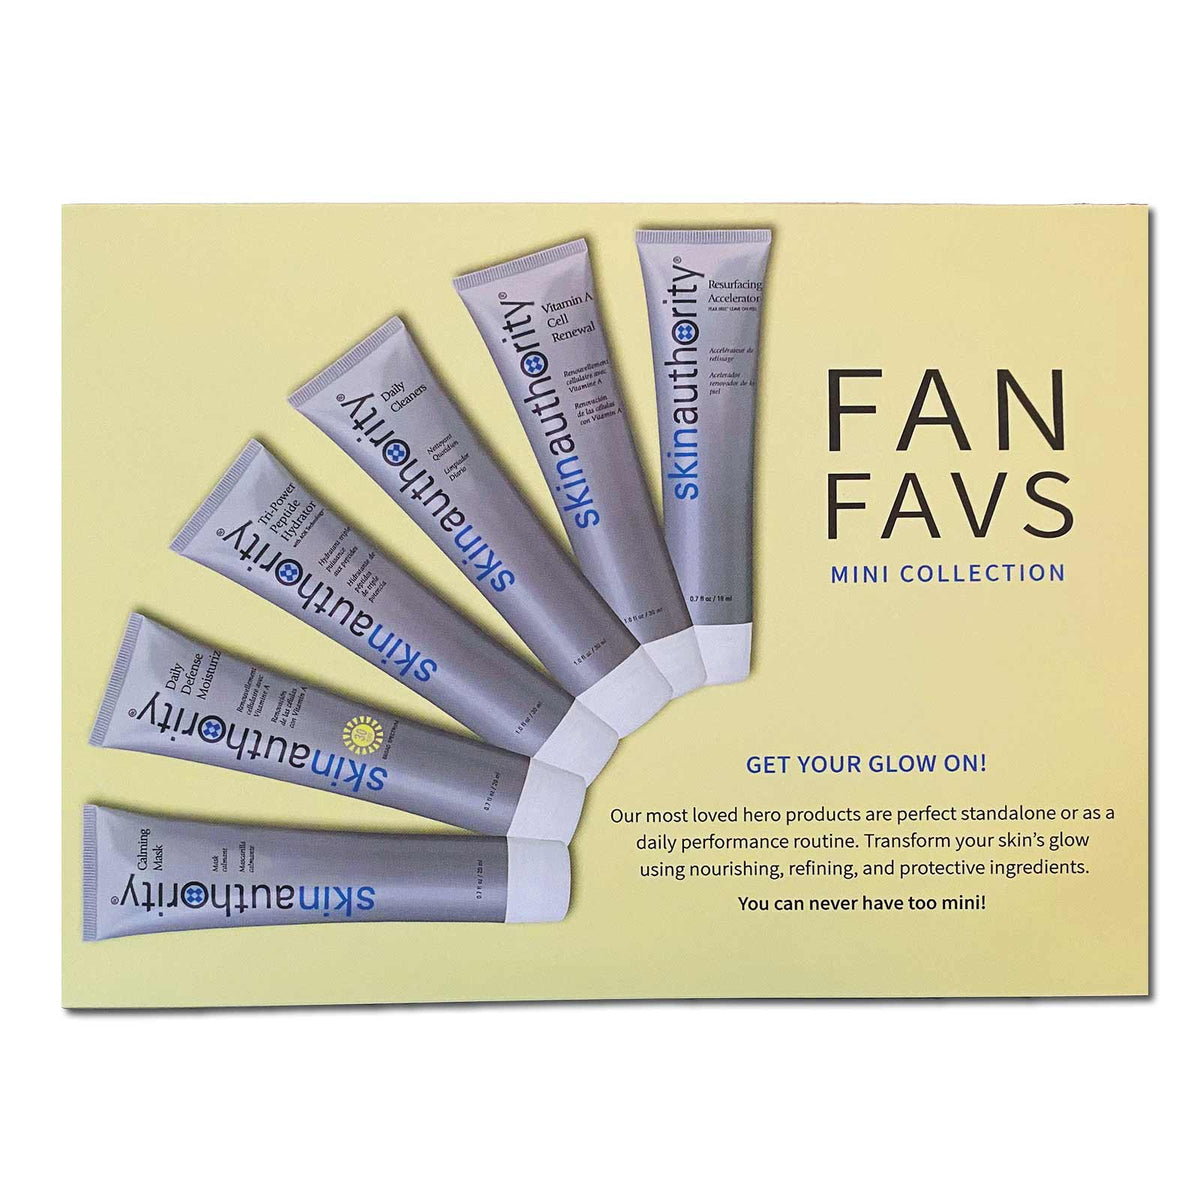 Skin Authority Fan Favs Mini Collection for Daily Skin Routine